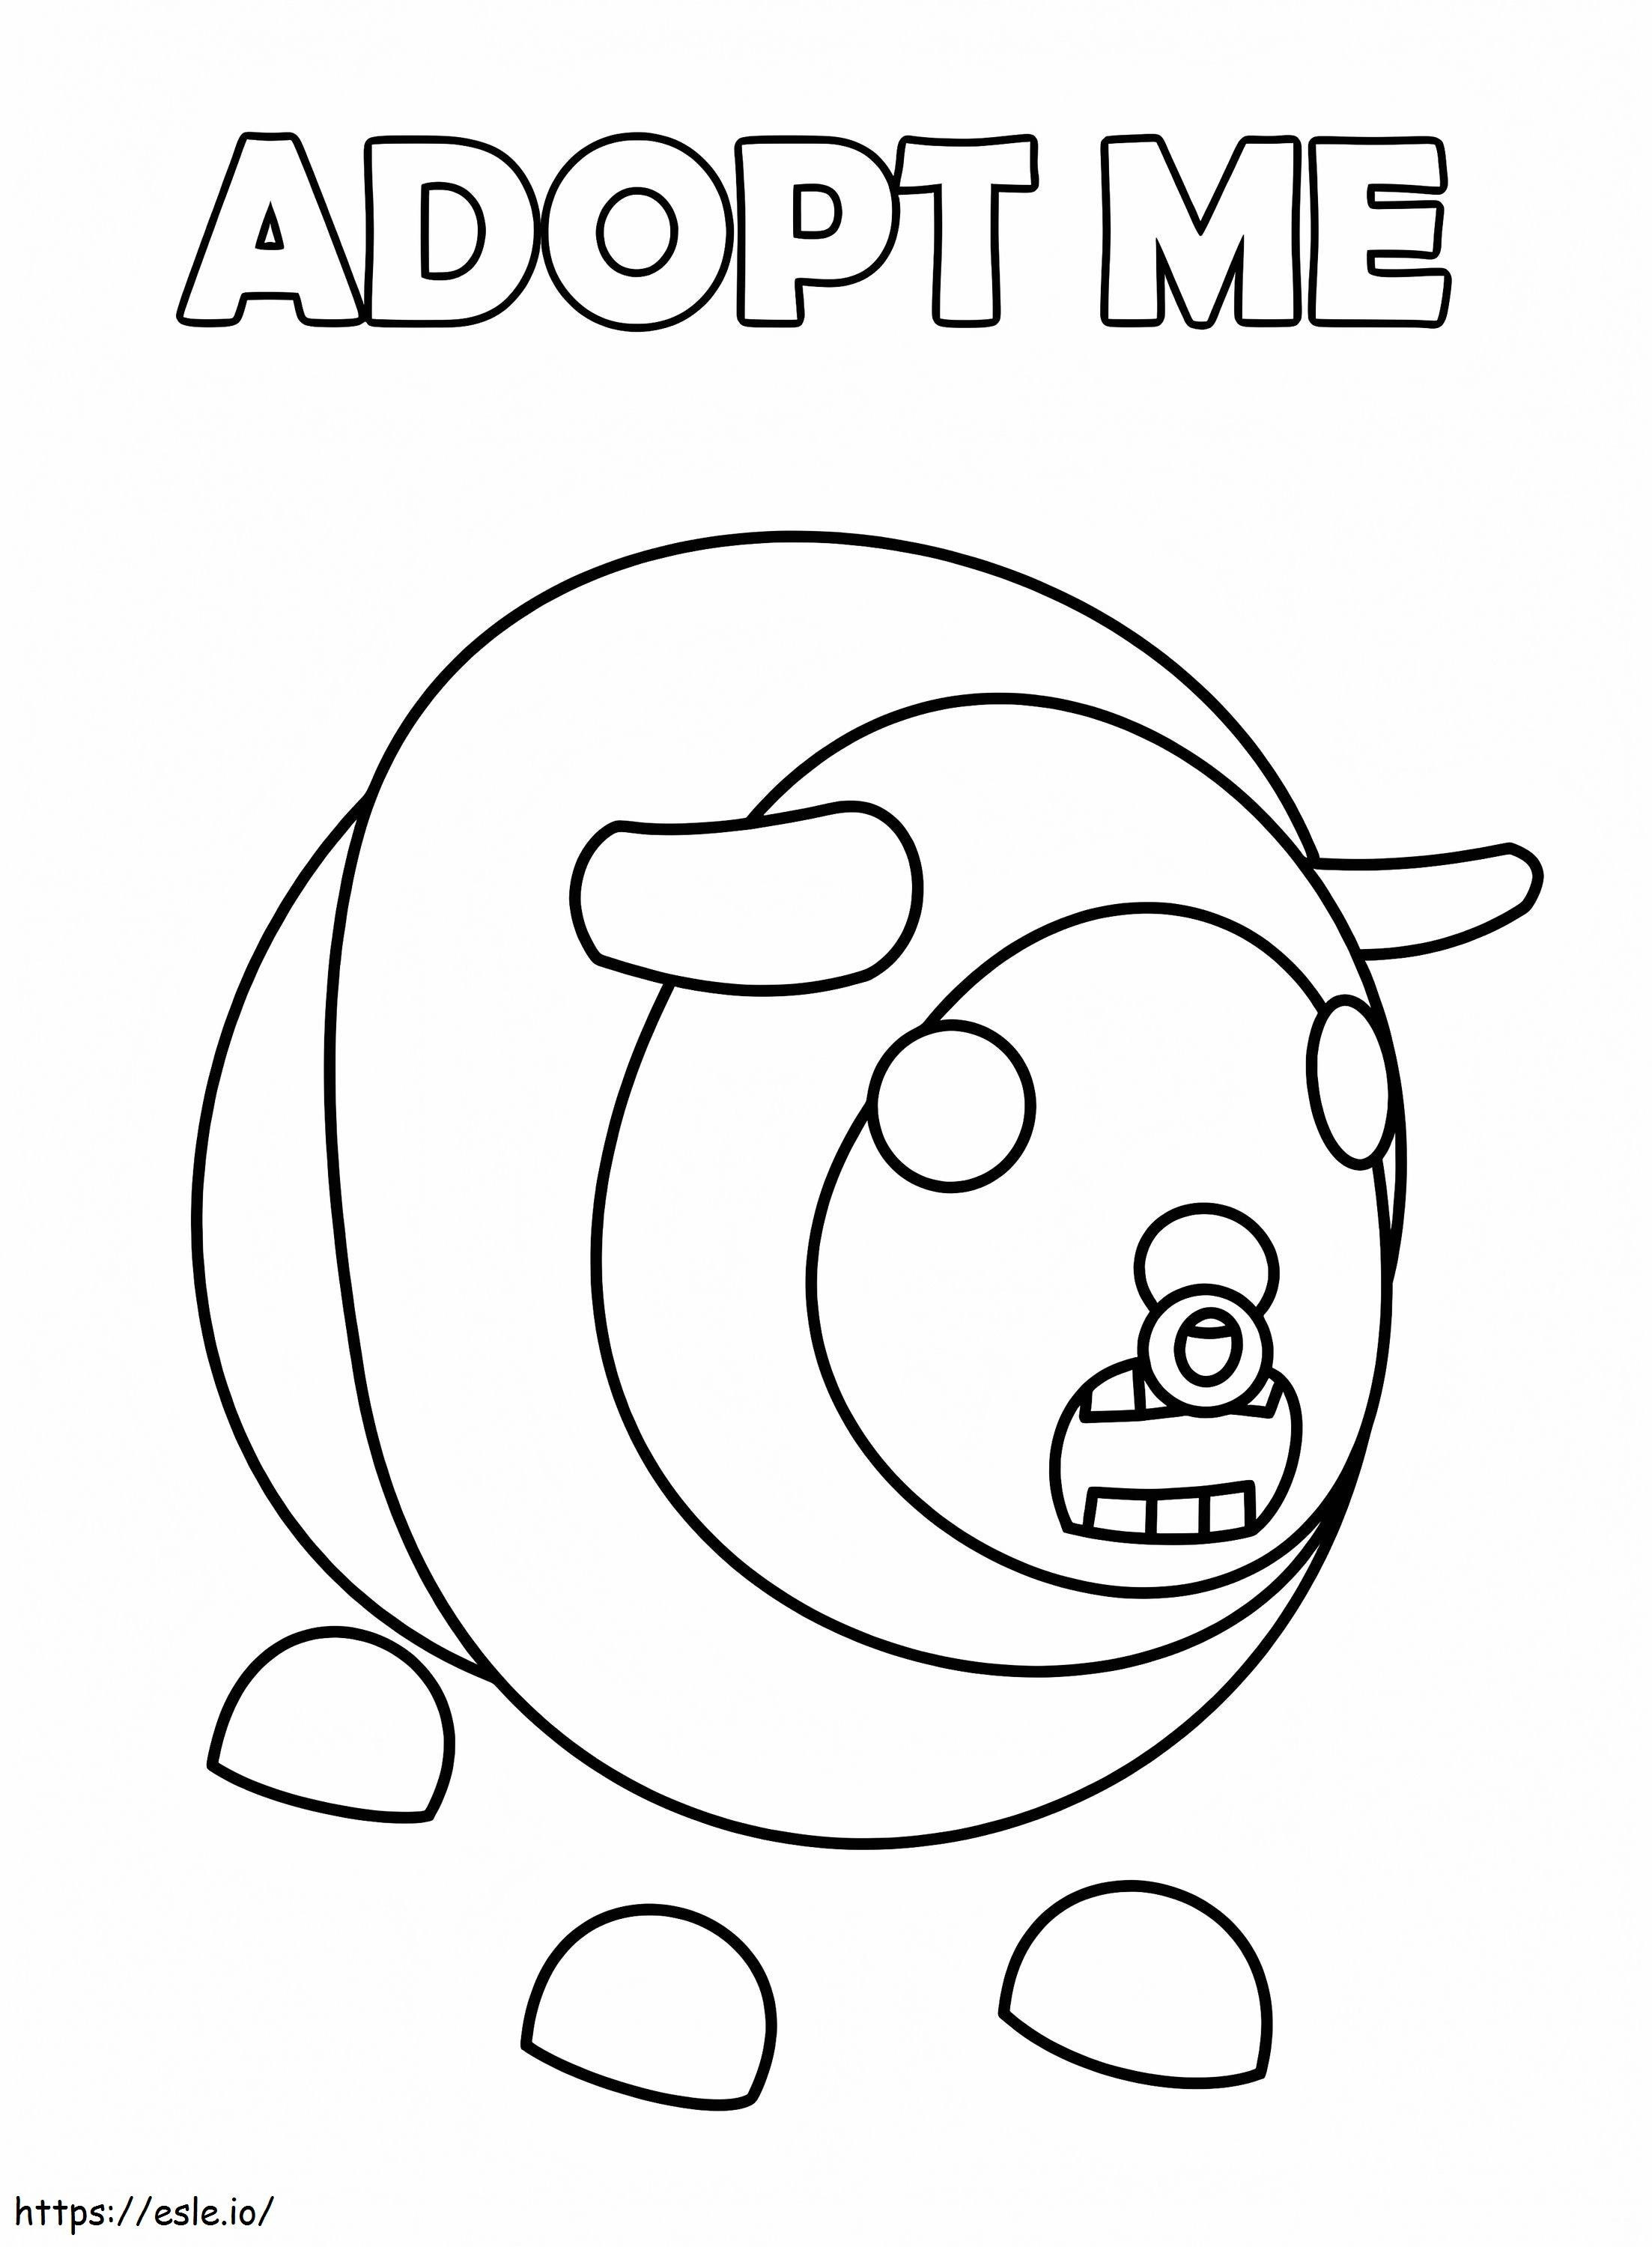 Bull Adopt Me coloring page